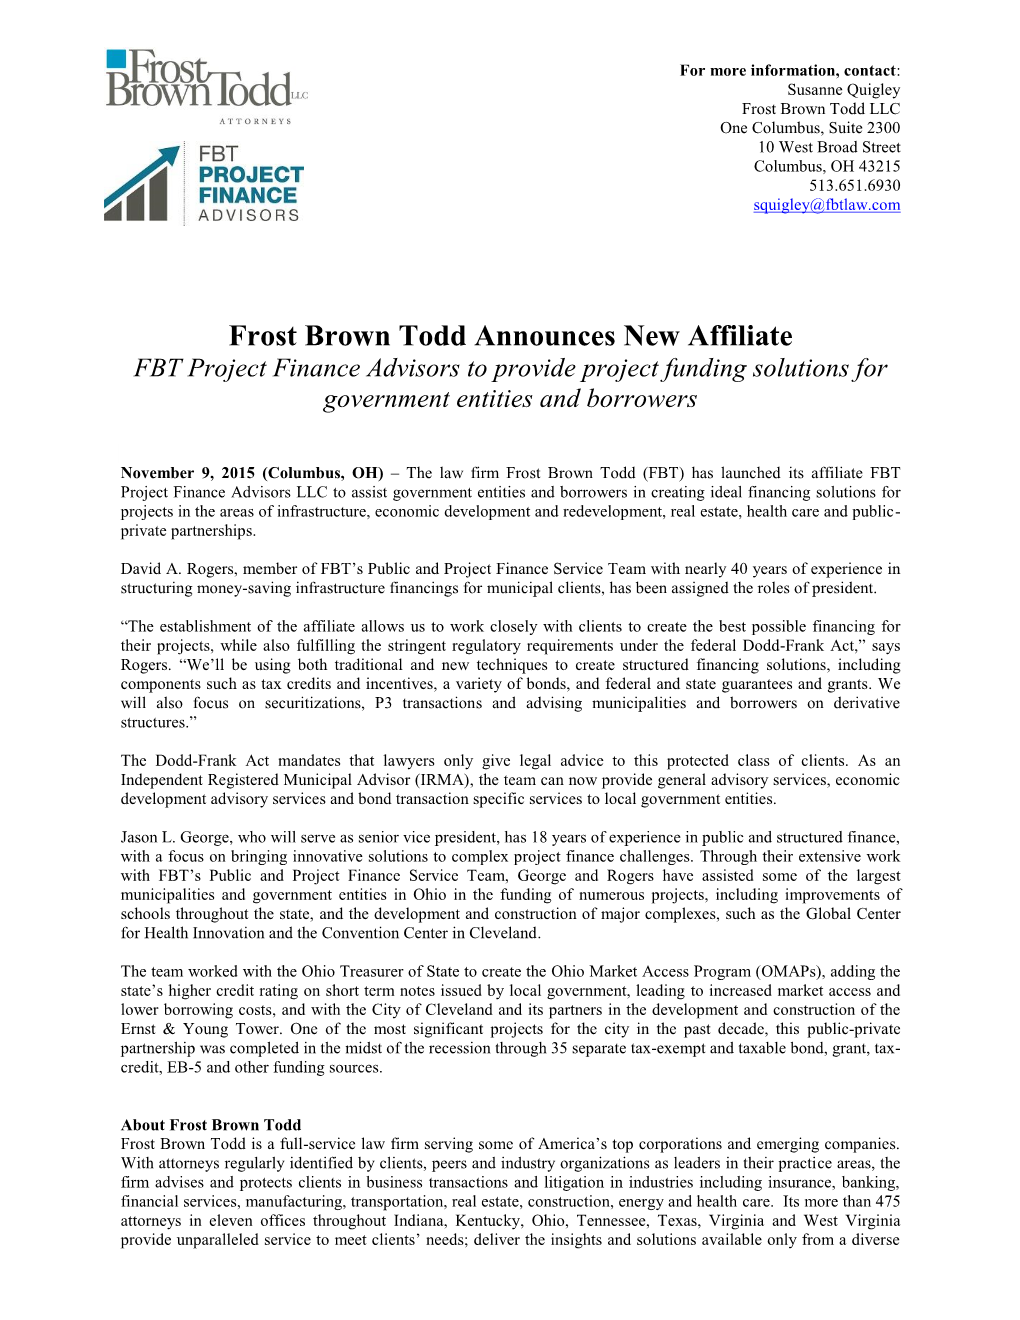 Frost Brown Todd Announces New Affiliate, FBT Project Finance Advisors